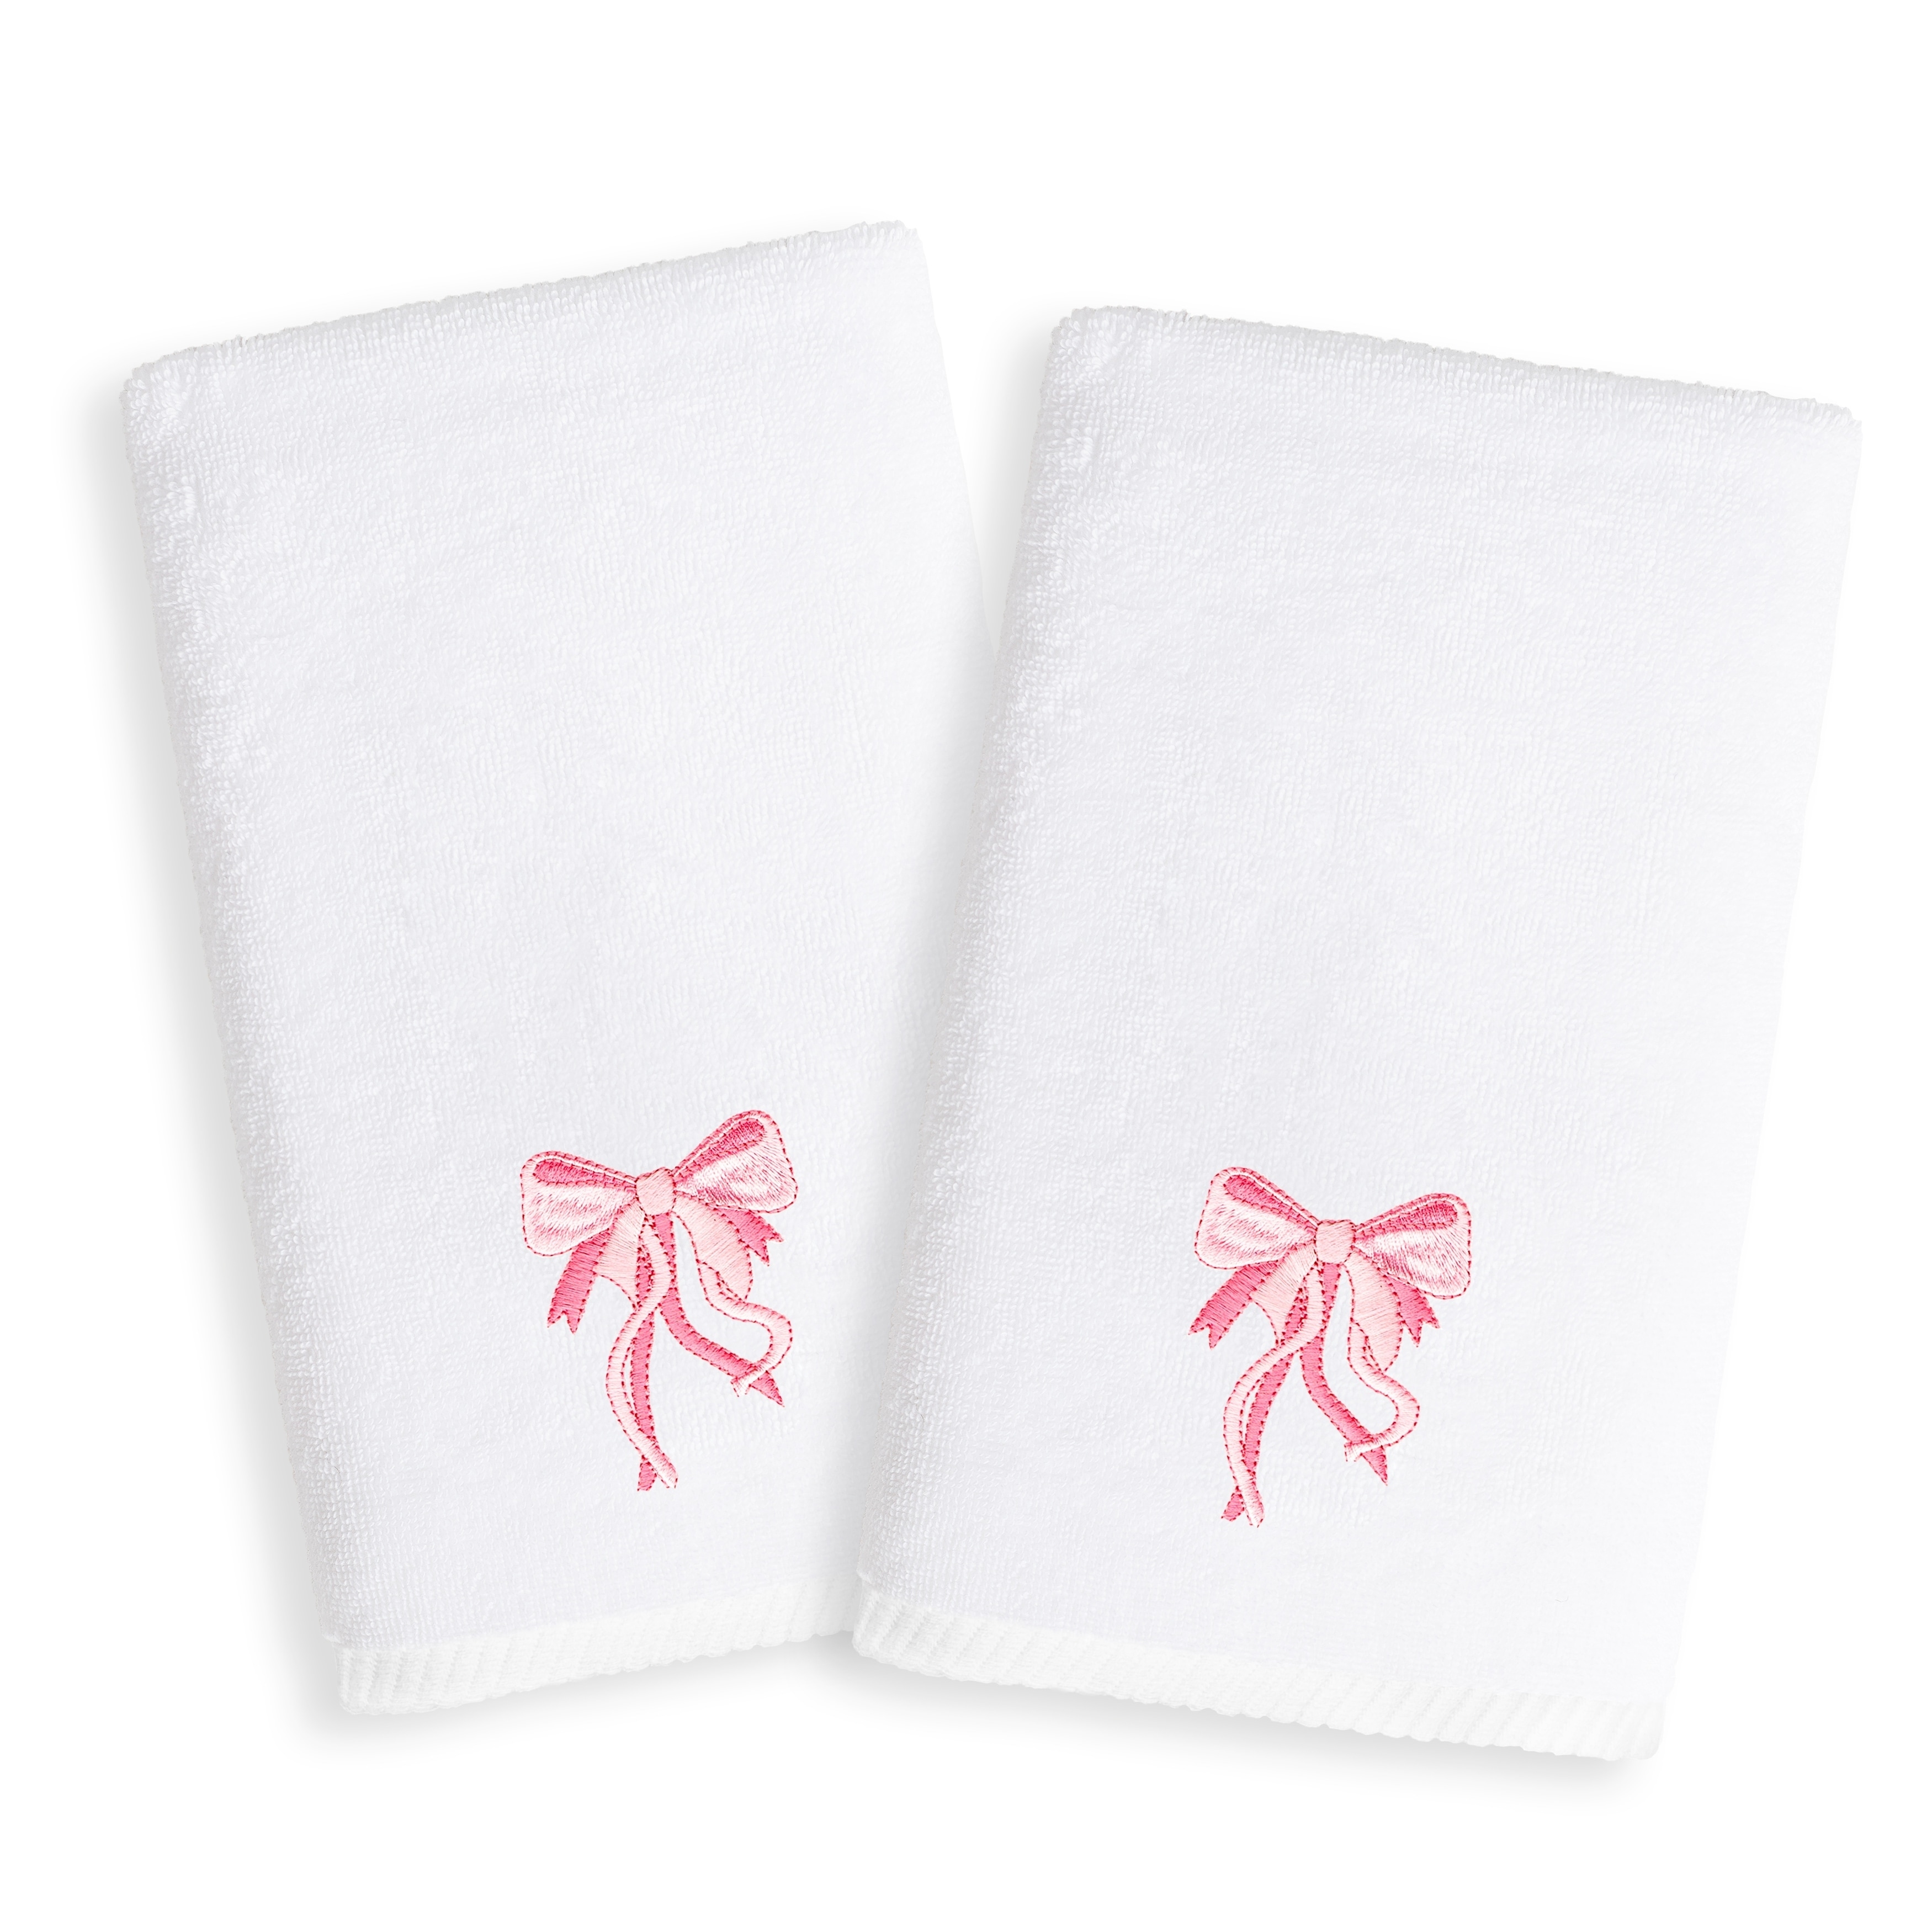 https://ak1.ostkcdn.com/images/products/18240953/Sweet-Kids-Pink-Bow-Embroidered-White-Turkish-Cotton-Hand-Towels-Set-of-2-1b68ab83-3f33-4bc3-b8e0-7ad2f219fe12.jpg